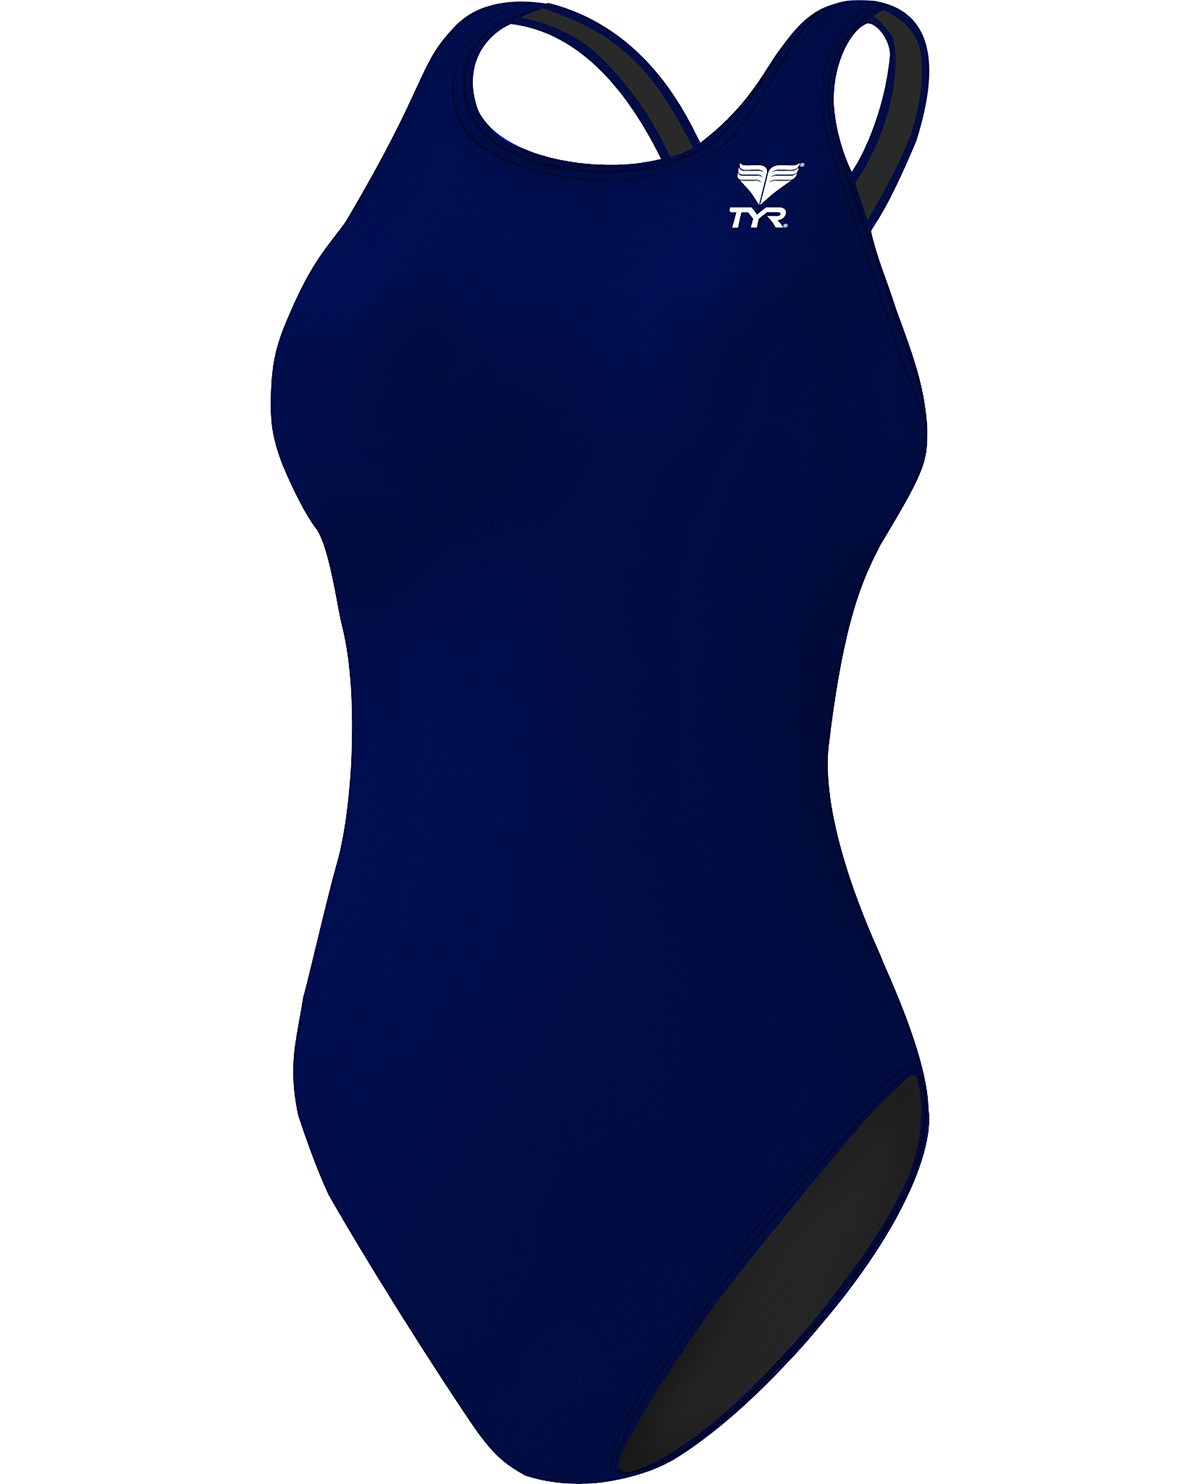 Station . Swimsuit clipart